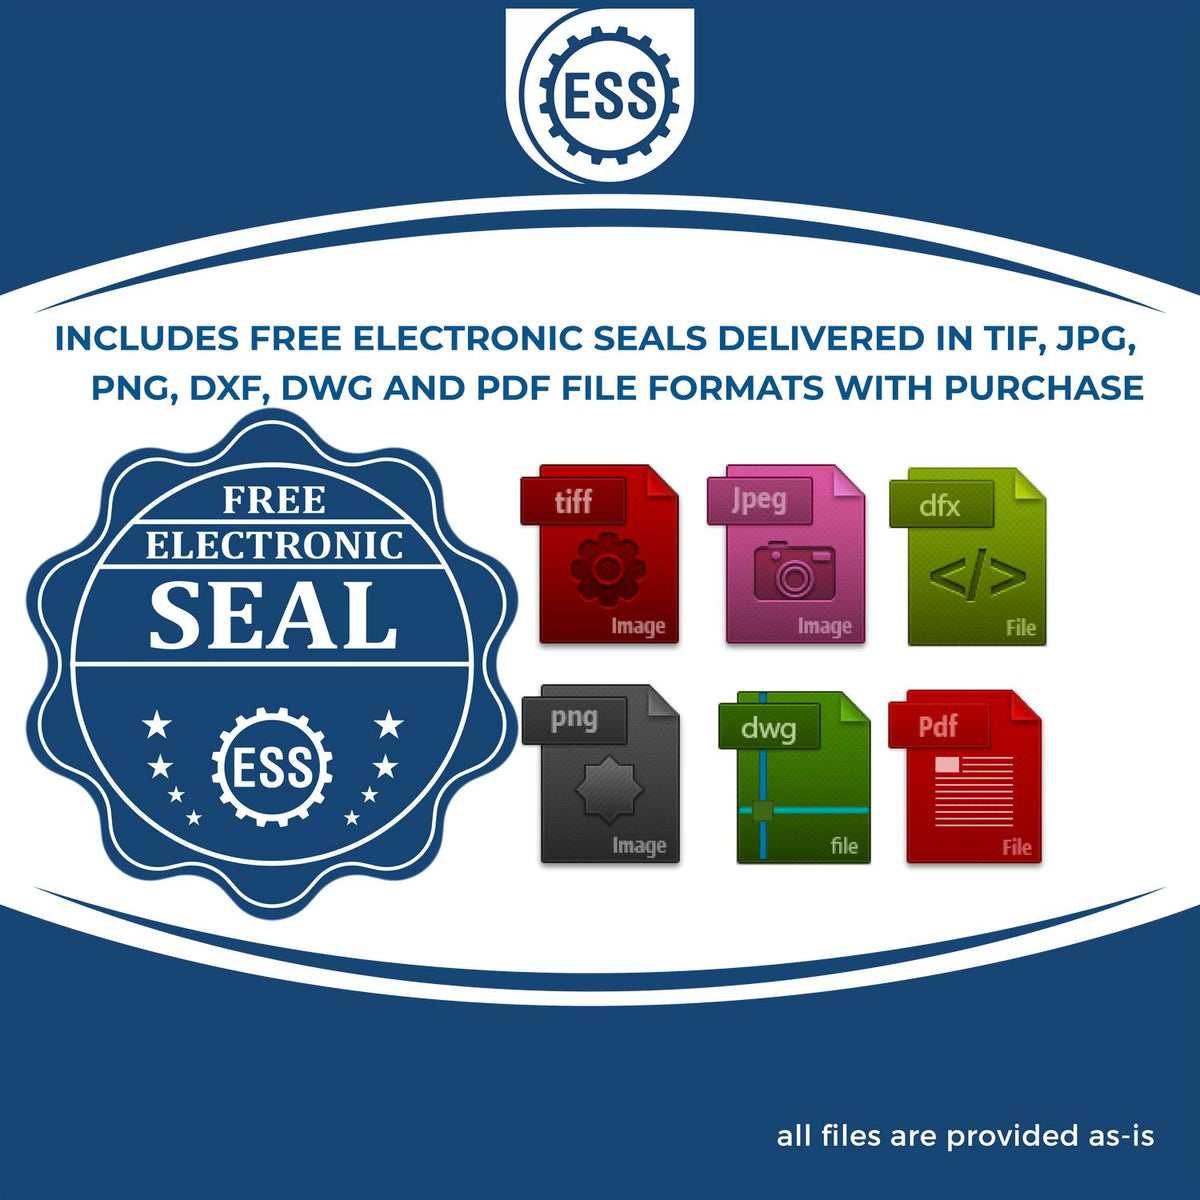 An infographic for the free electronic seal for the Gift Connecticut Architect Seal illustrating the different file type icons such as DXF, DWG, TIF, JPG and PNG.